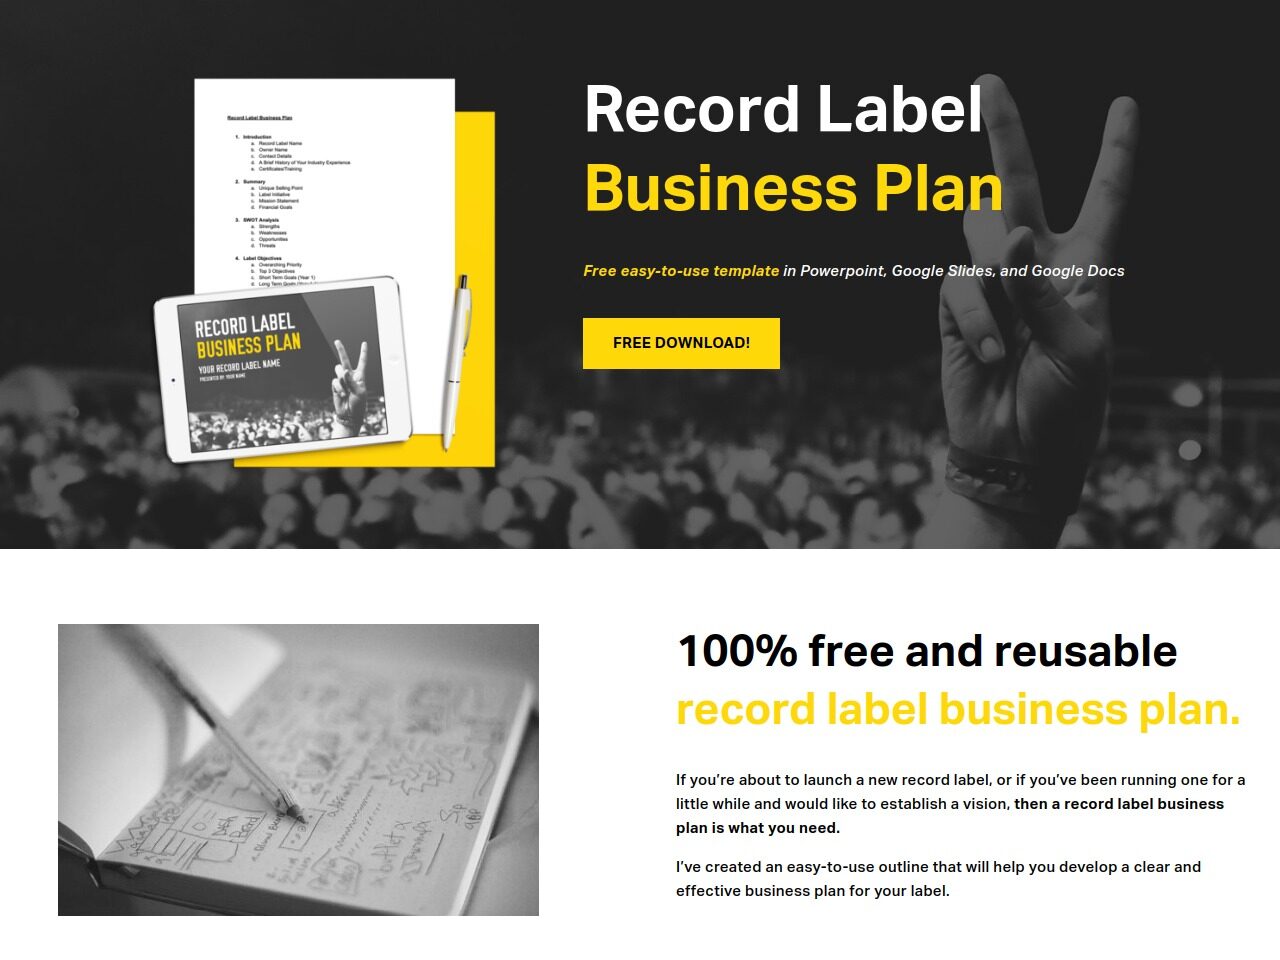 a record label business plan